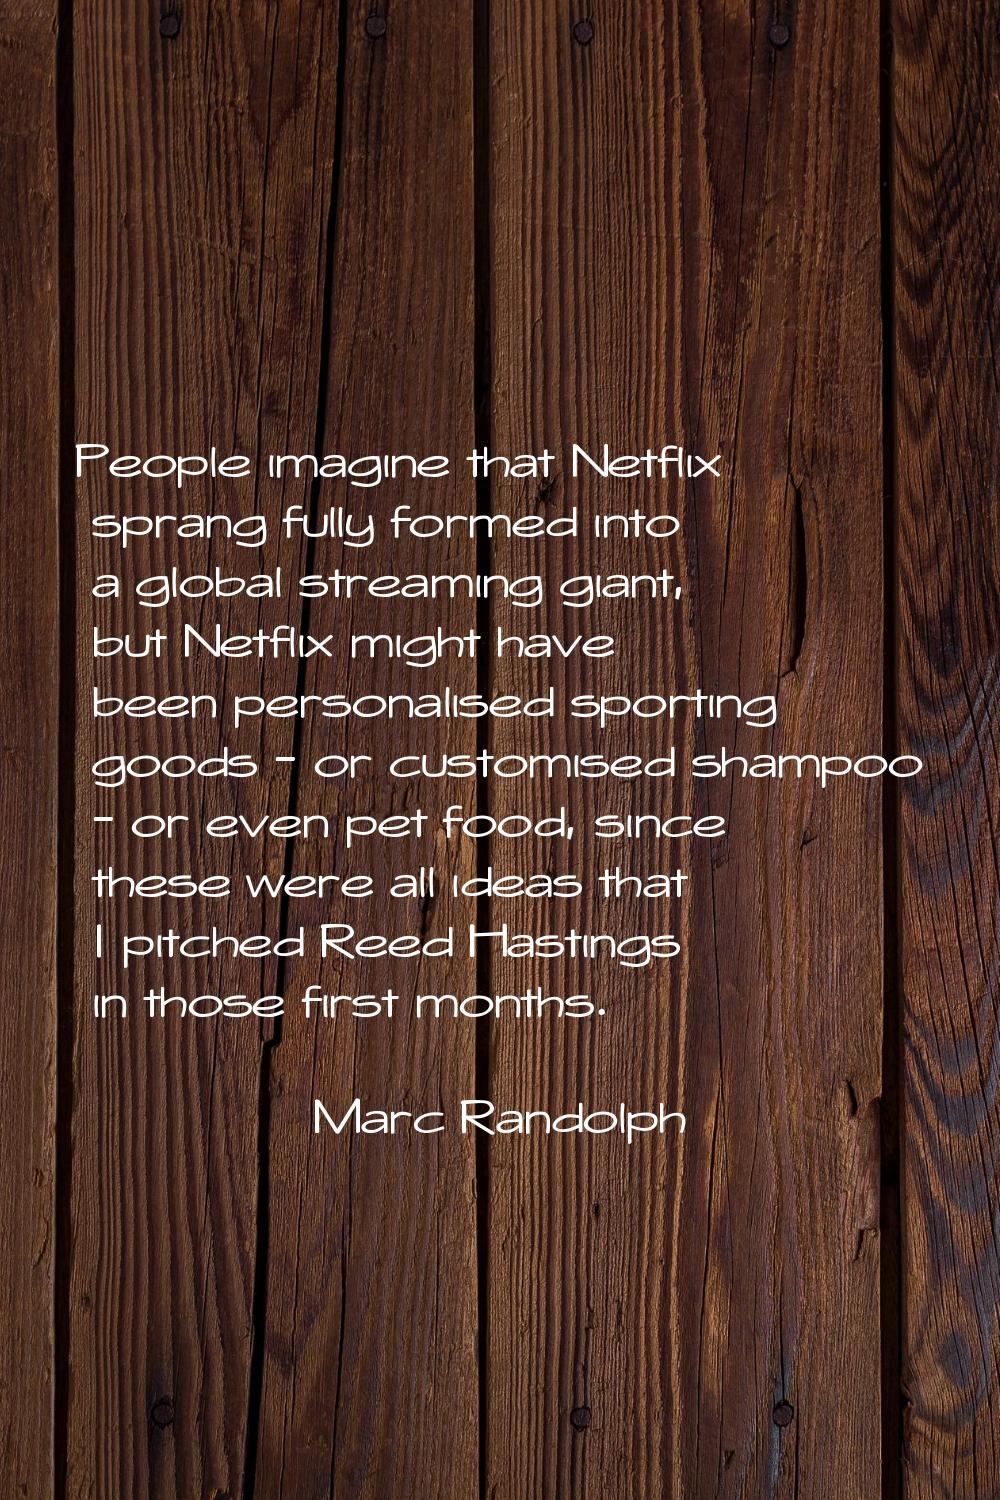 People imagine that Netflix sprang fully formed into a global streaming giant, but Netflix might ha